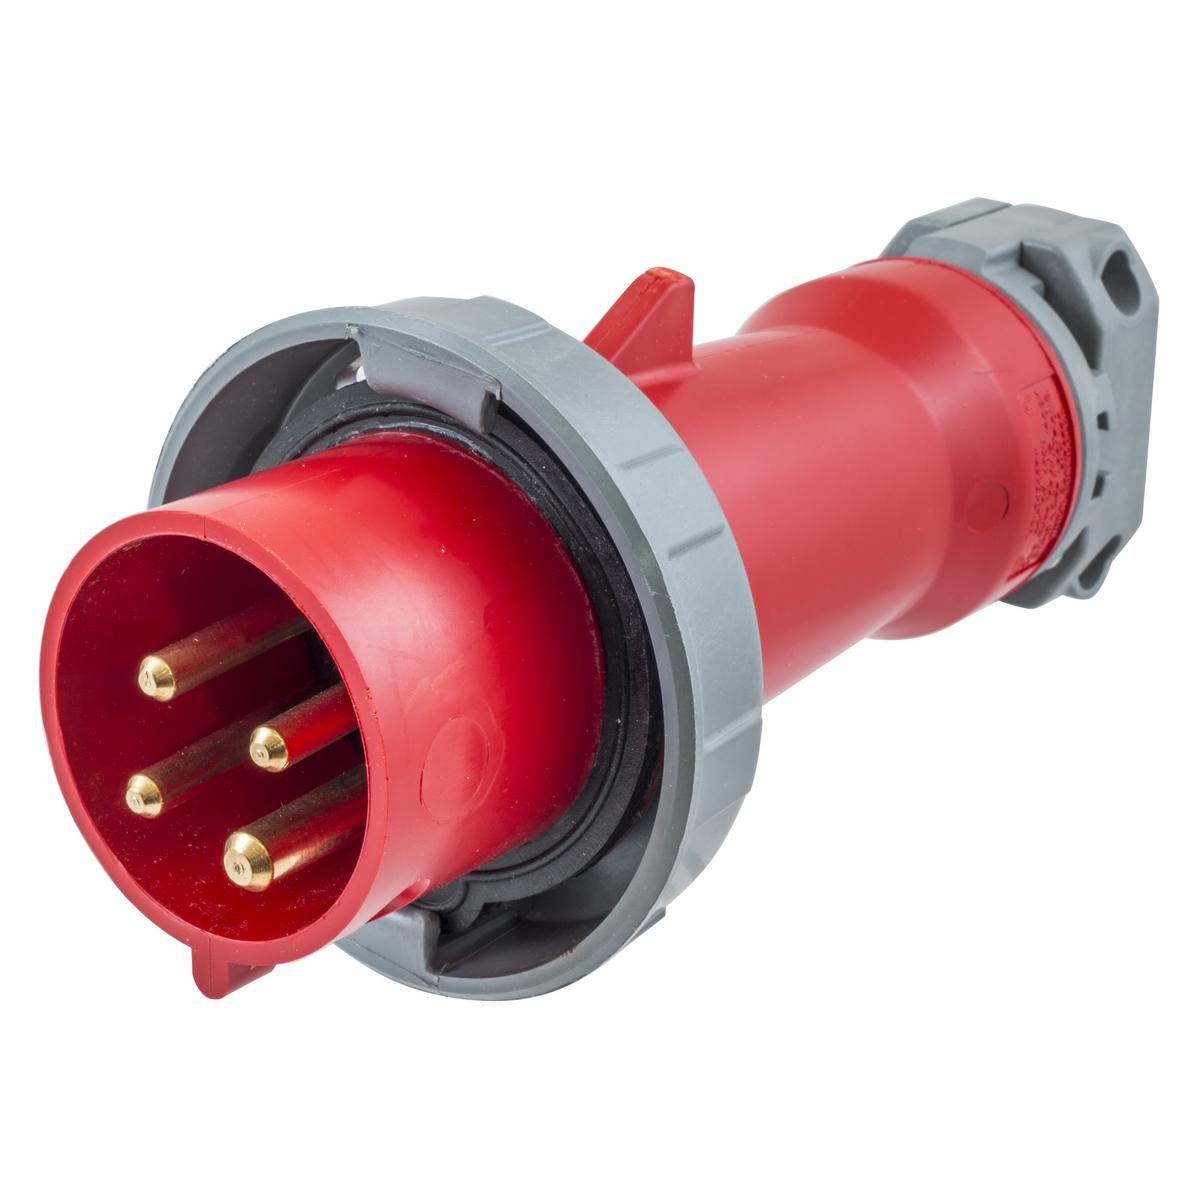 Hubbell HBLS460P6W Heavy Duty Products, IEC Pin and Sleeve, Plug, Switched, 60/63A 380-415V AC, 3-Pole 4-Wire, NEMA 4X/IP 69K 